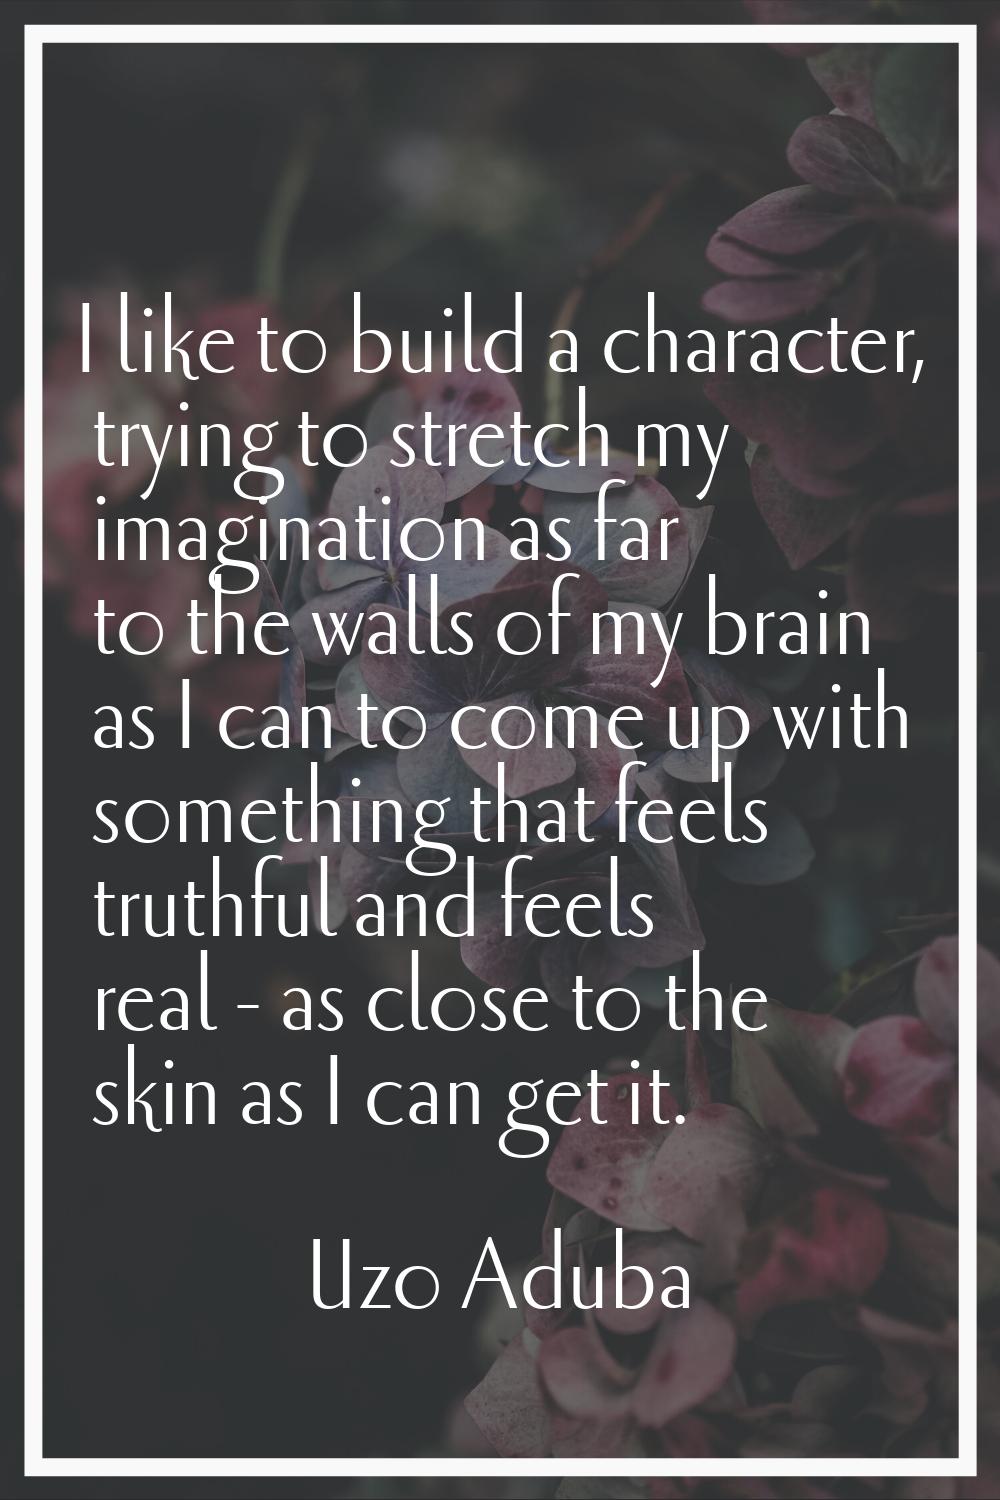 I like to build a character, trying to stretch my imagination as far to the walls of my brain as I 